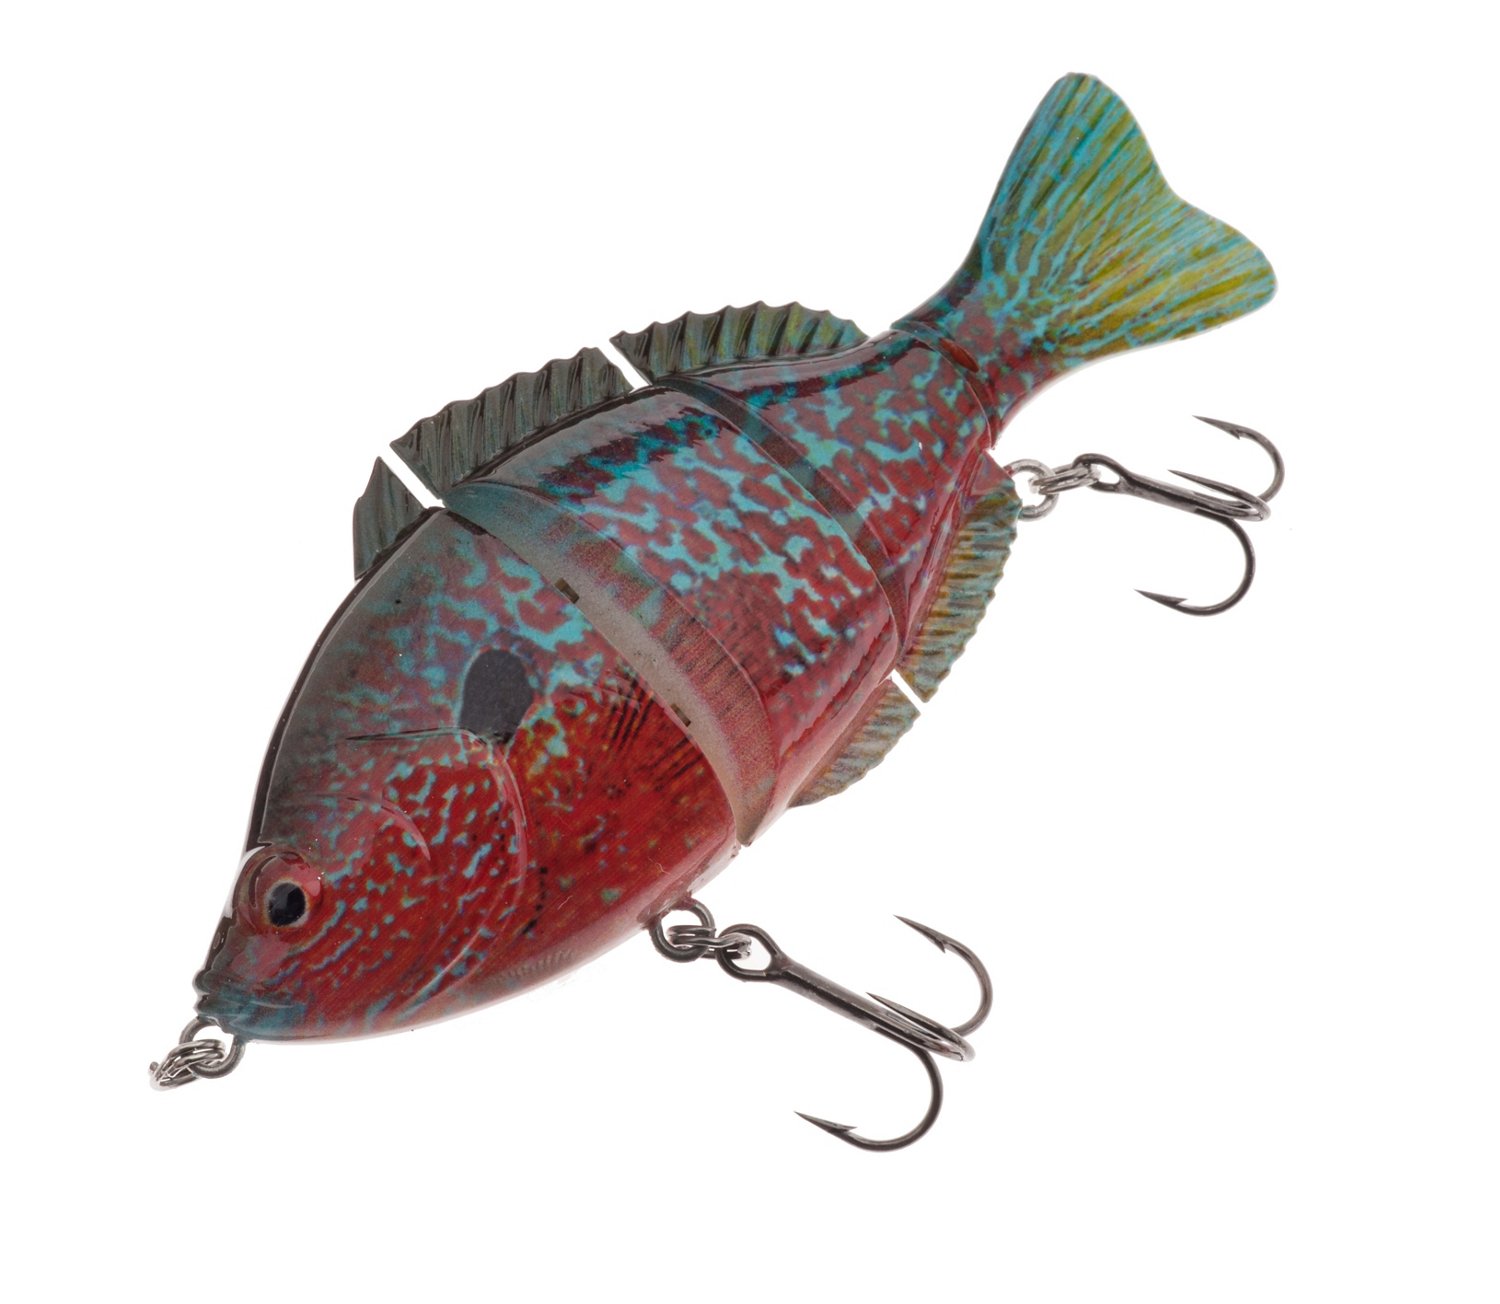 H2O XPRESS Jointed Sunfish 3.5 in Swimbait